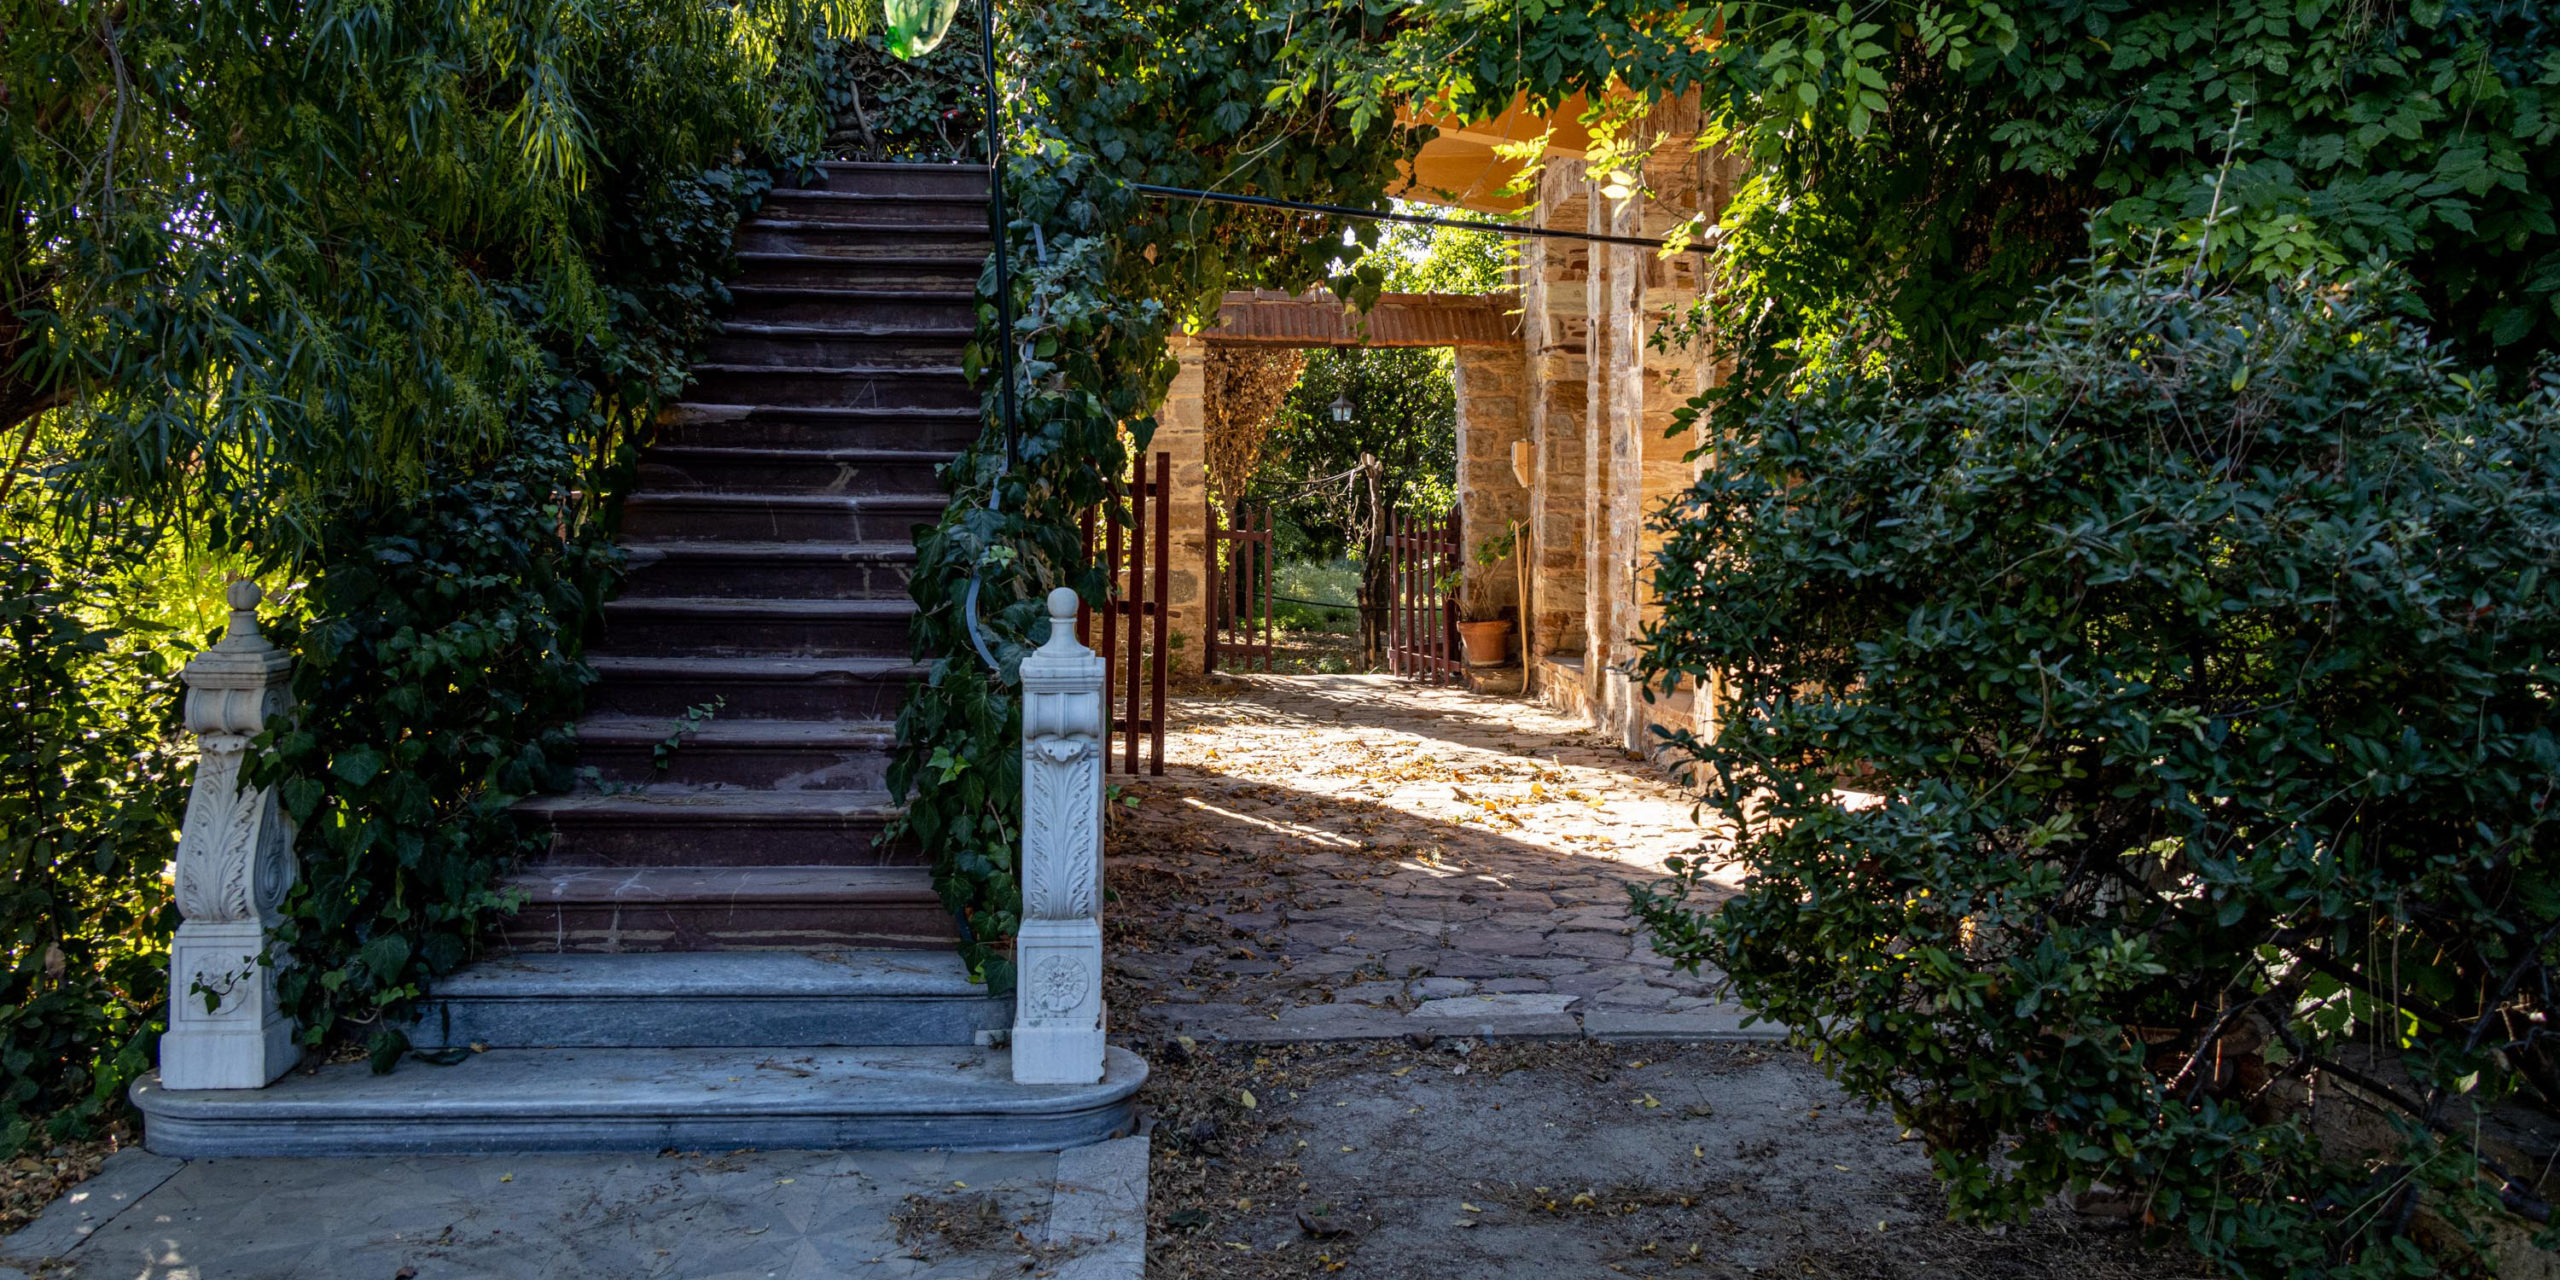 On the Greek island of Chios, a historic neighborhood in pictures